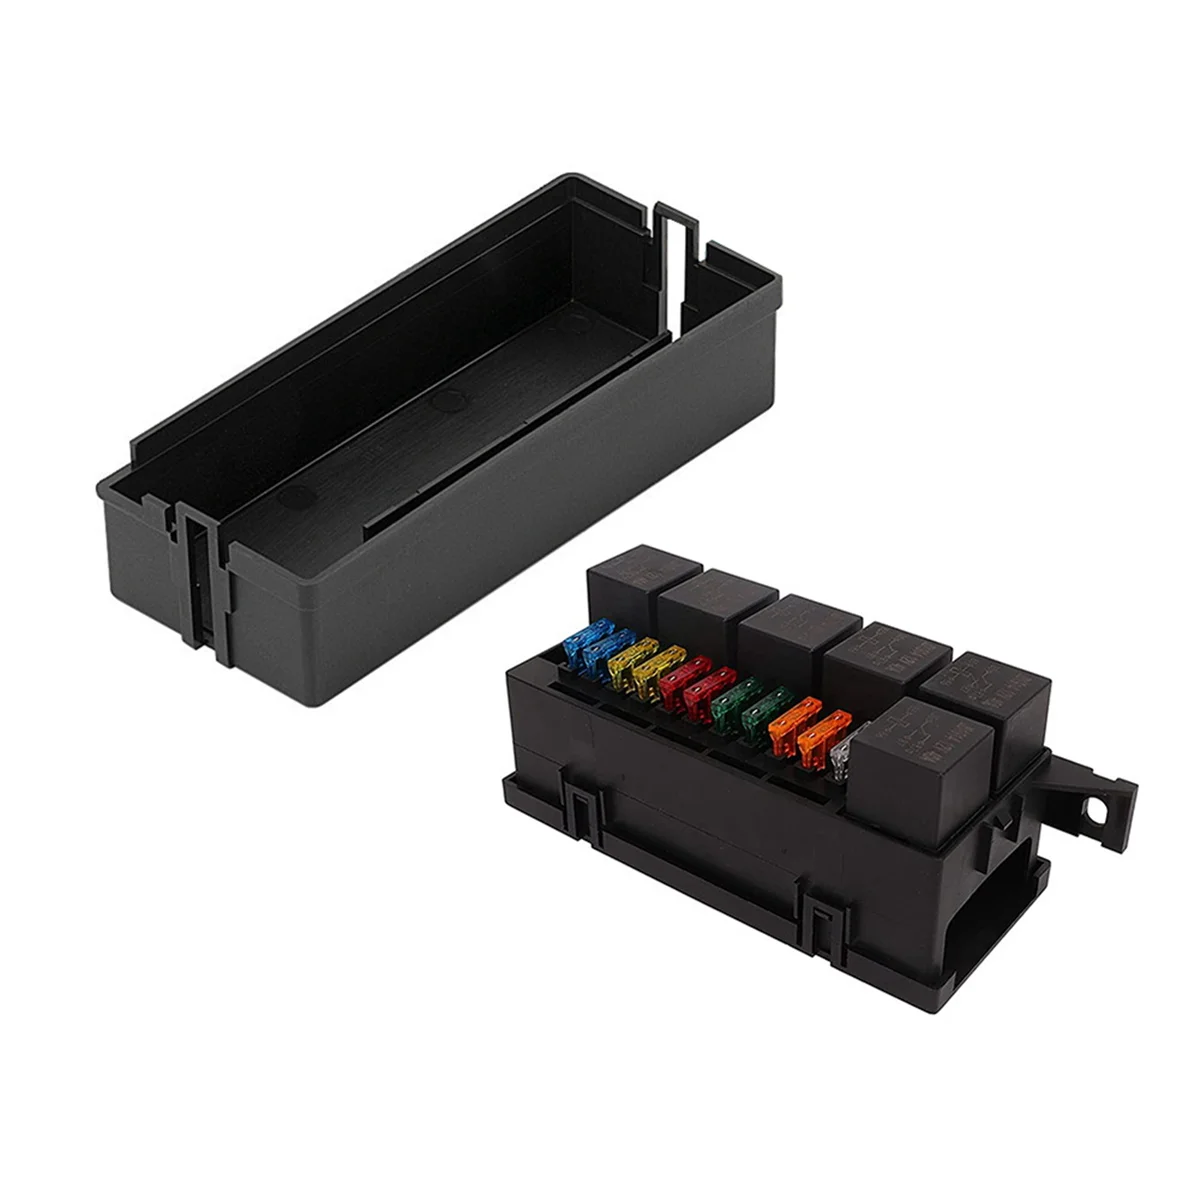 

11 Way Relay Fuse Block Holds Universal Waterproof Fuse Relay Box with 6 Relays and Metallic Pins